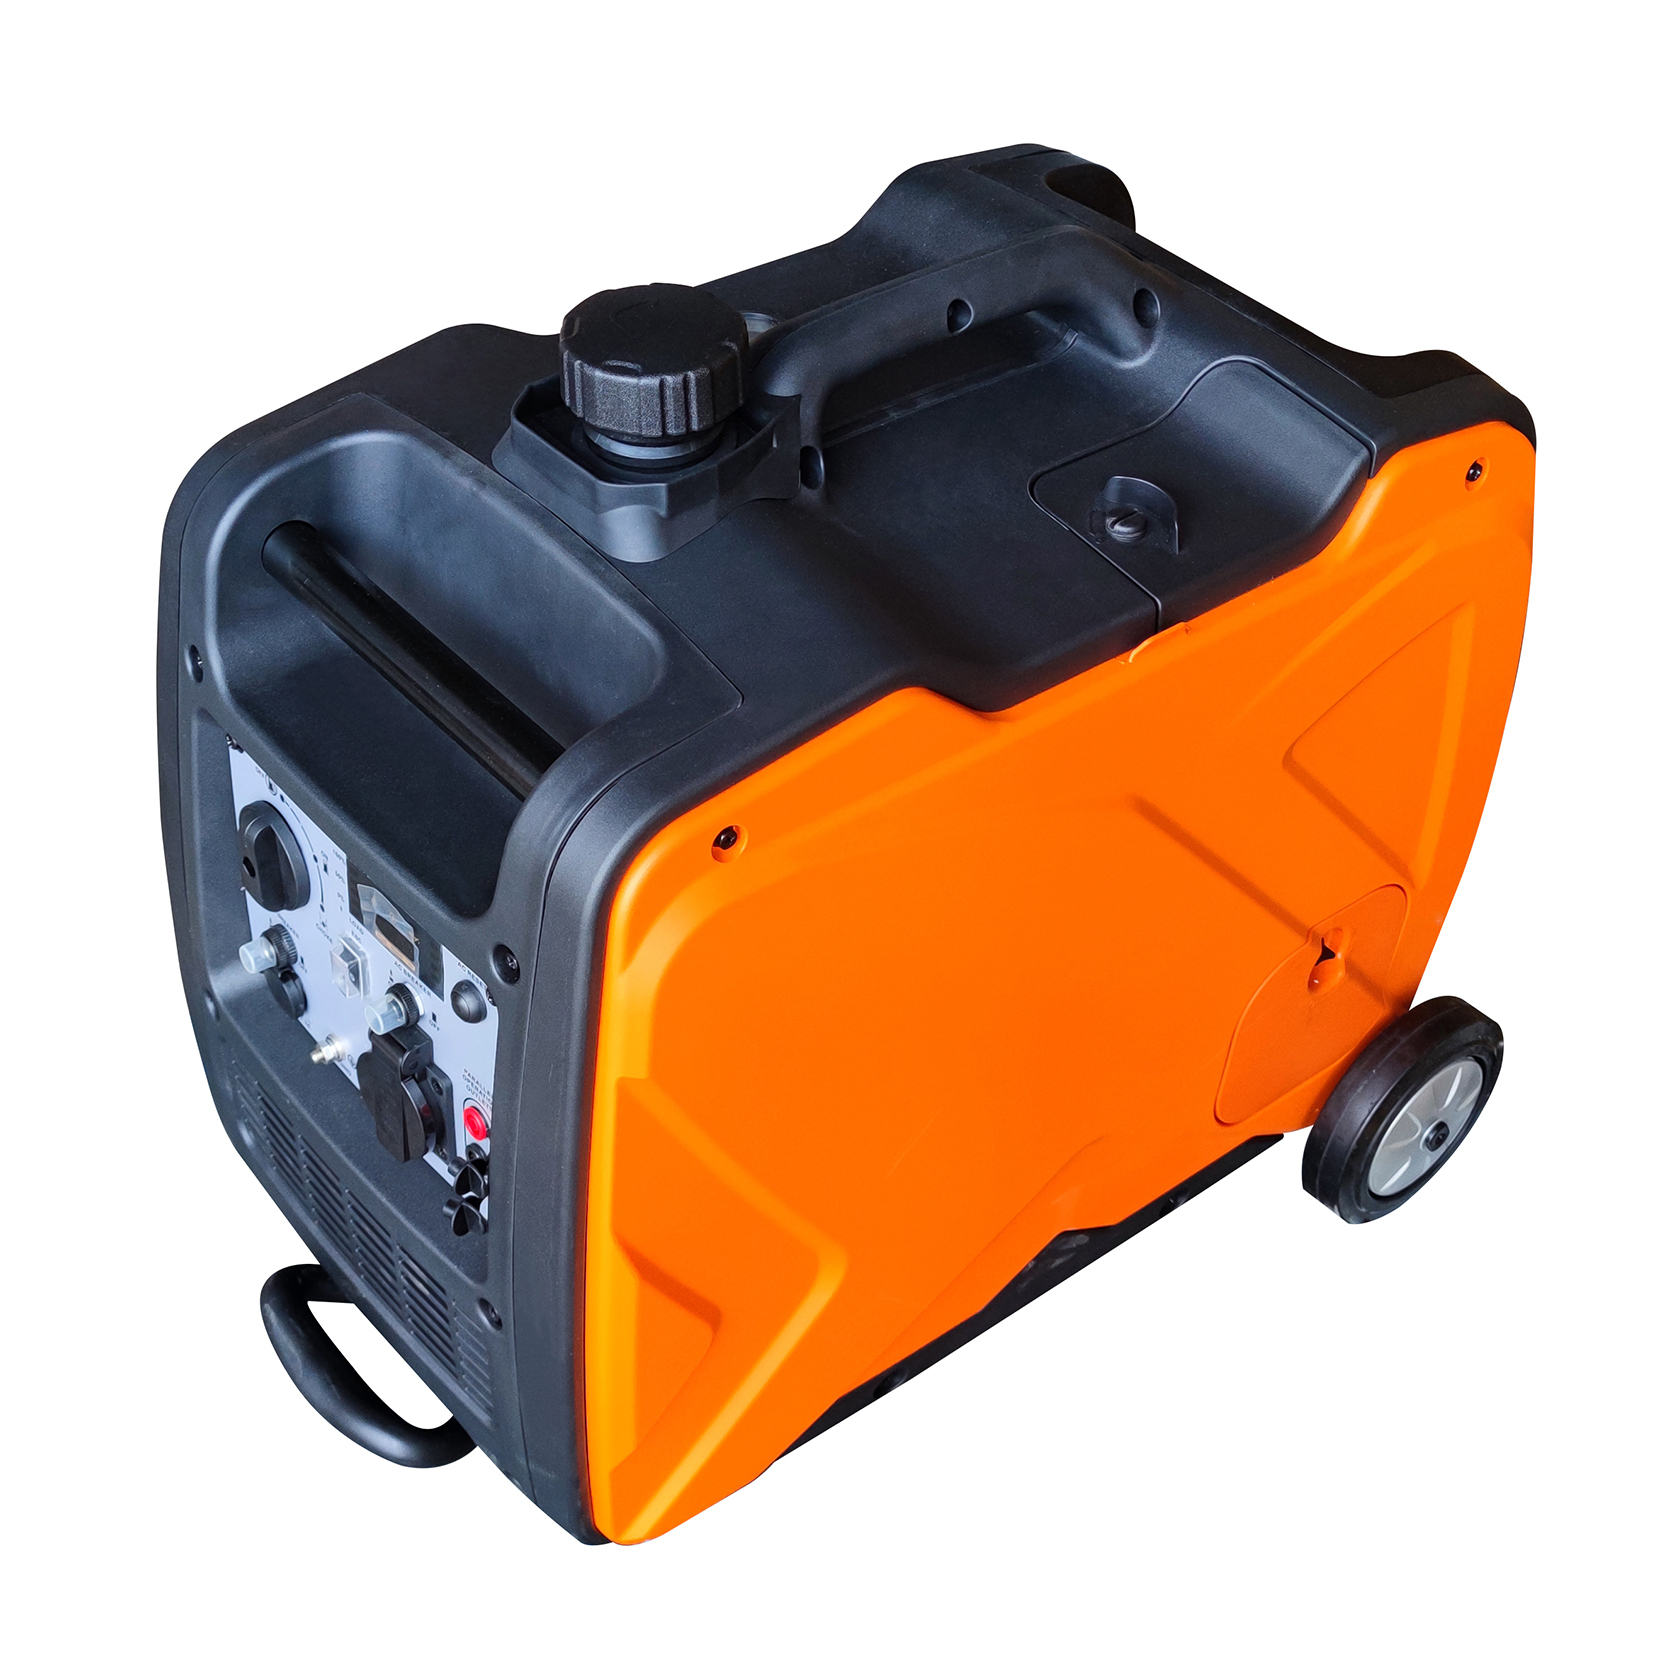 3kw Air Cooled Travel Gasoline Inverter Generator with Wheels